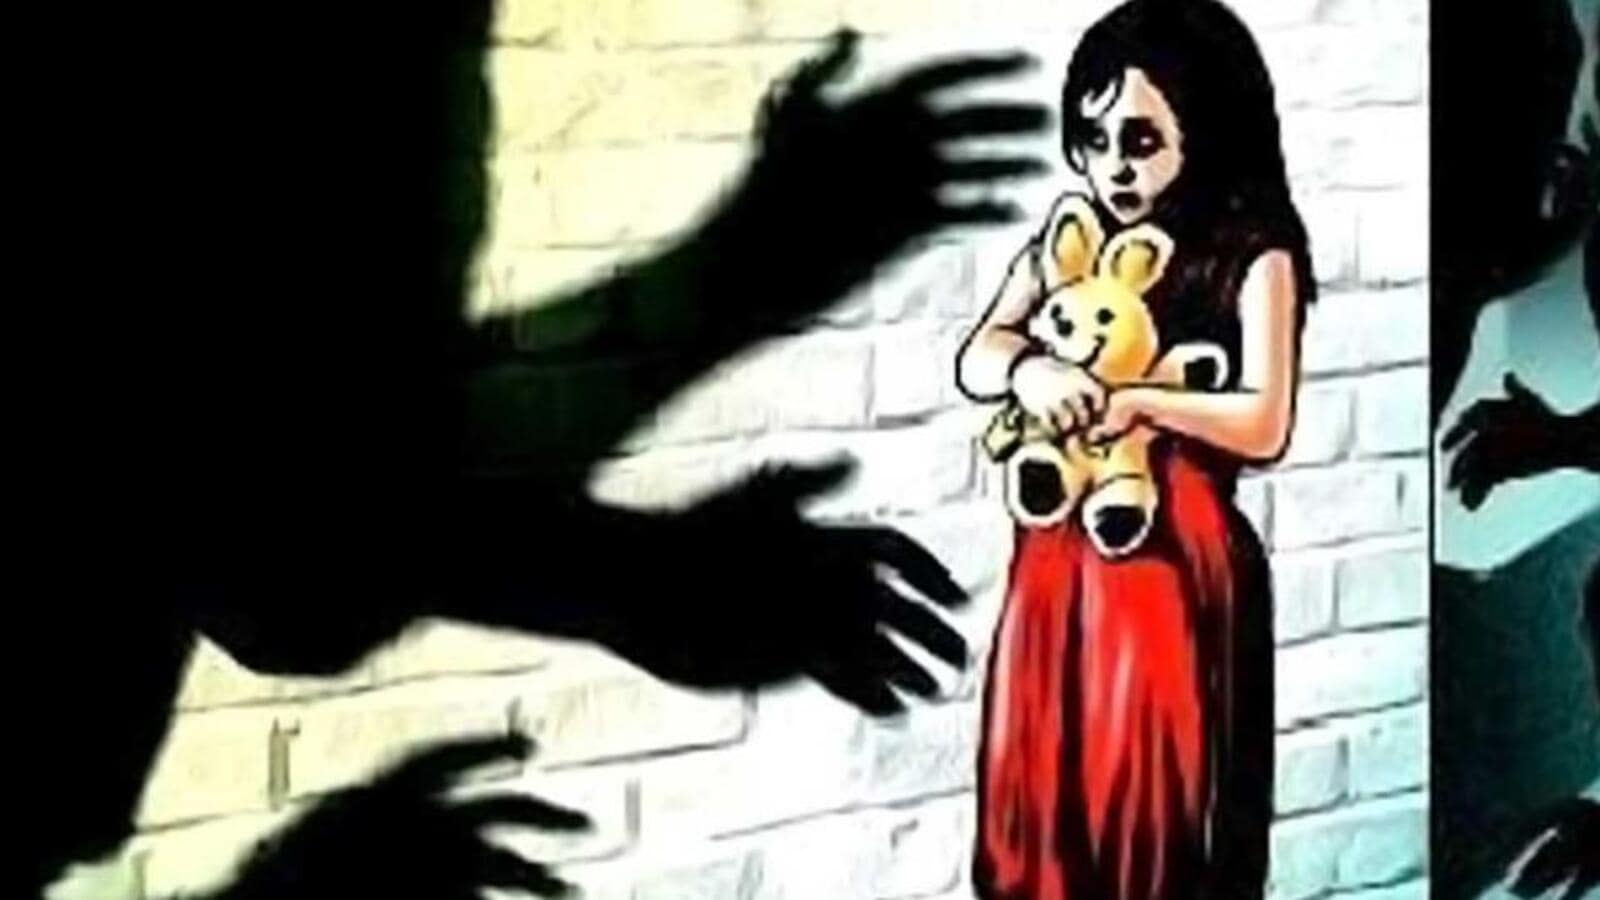 Indian Crying Gang Rape Porn Video - 8 men rape, film and blackmail 17-year-old Rajasthan girl. Then release  video - Hindustan Times